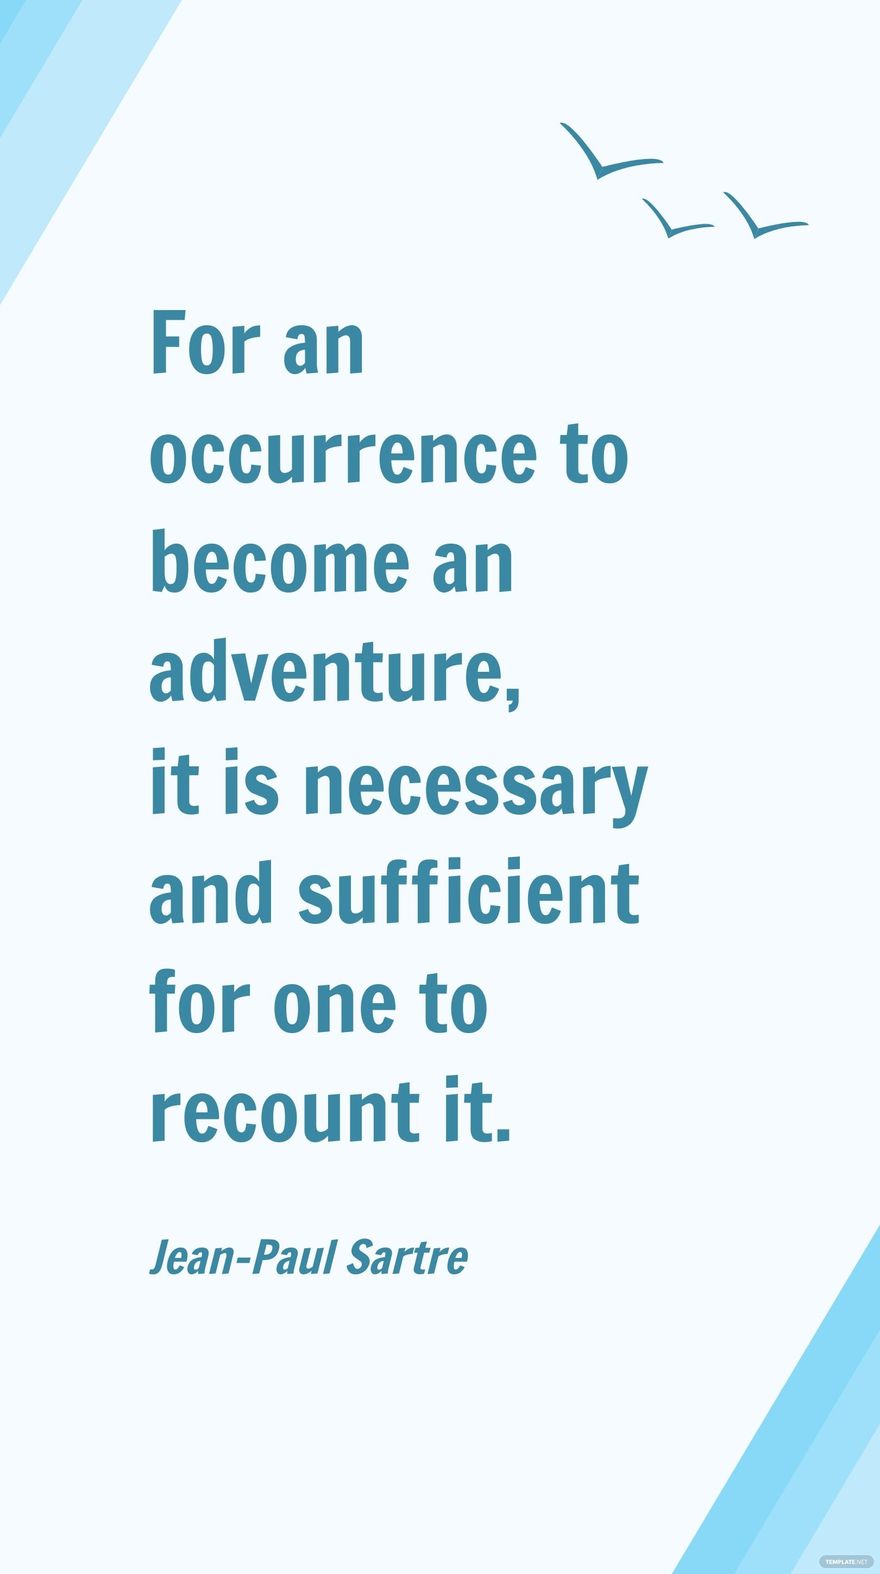 Free Jean-Paul Sartre - For an occurrence to become an adventure, it is necessary and sufficient for one to recount it. in JPG